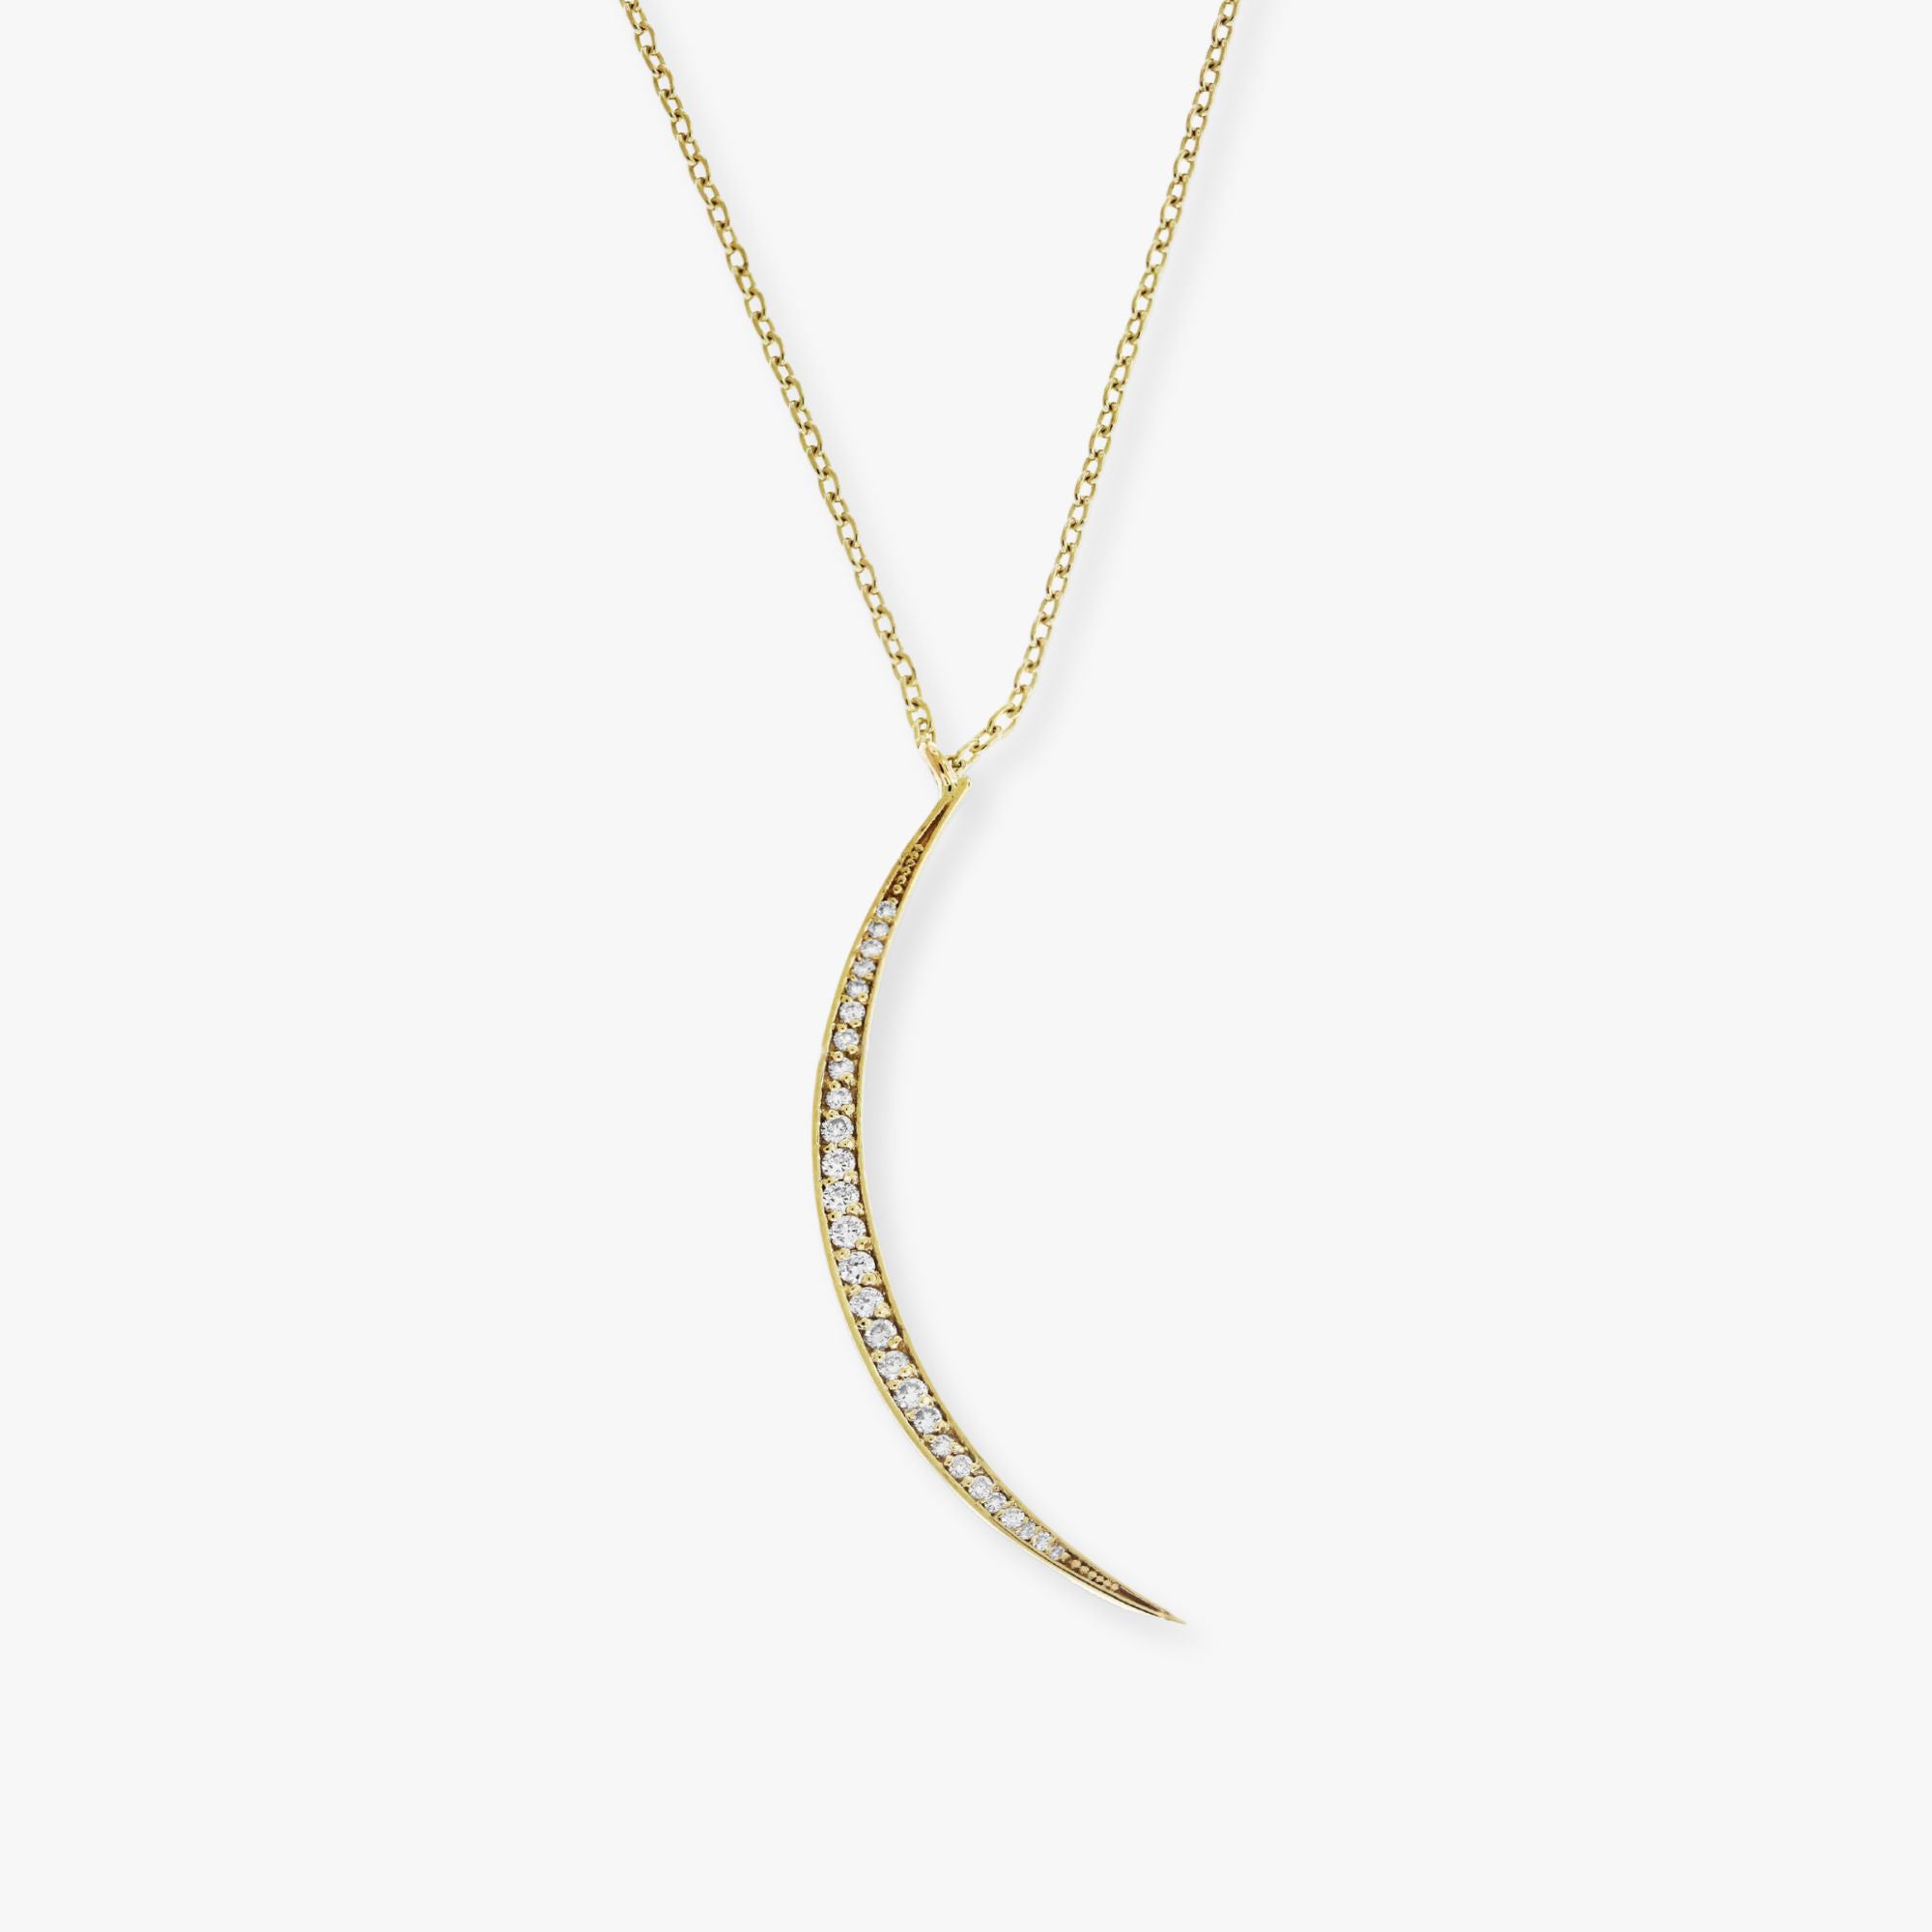 Diamond Crescent Moon Necklace Available in 14K and 18K Gold